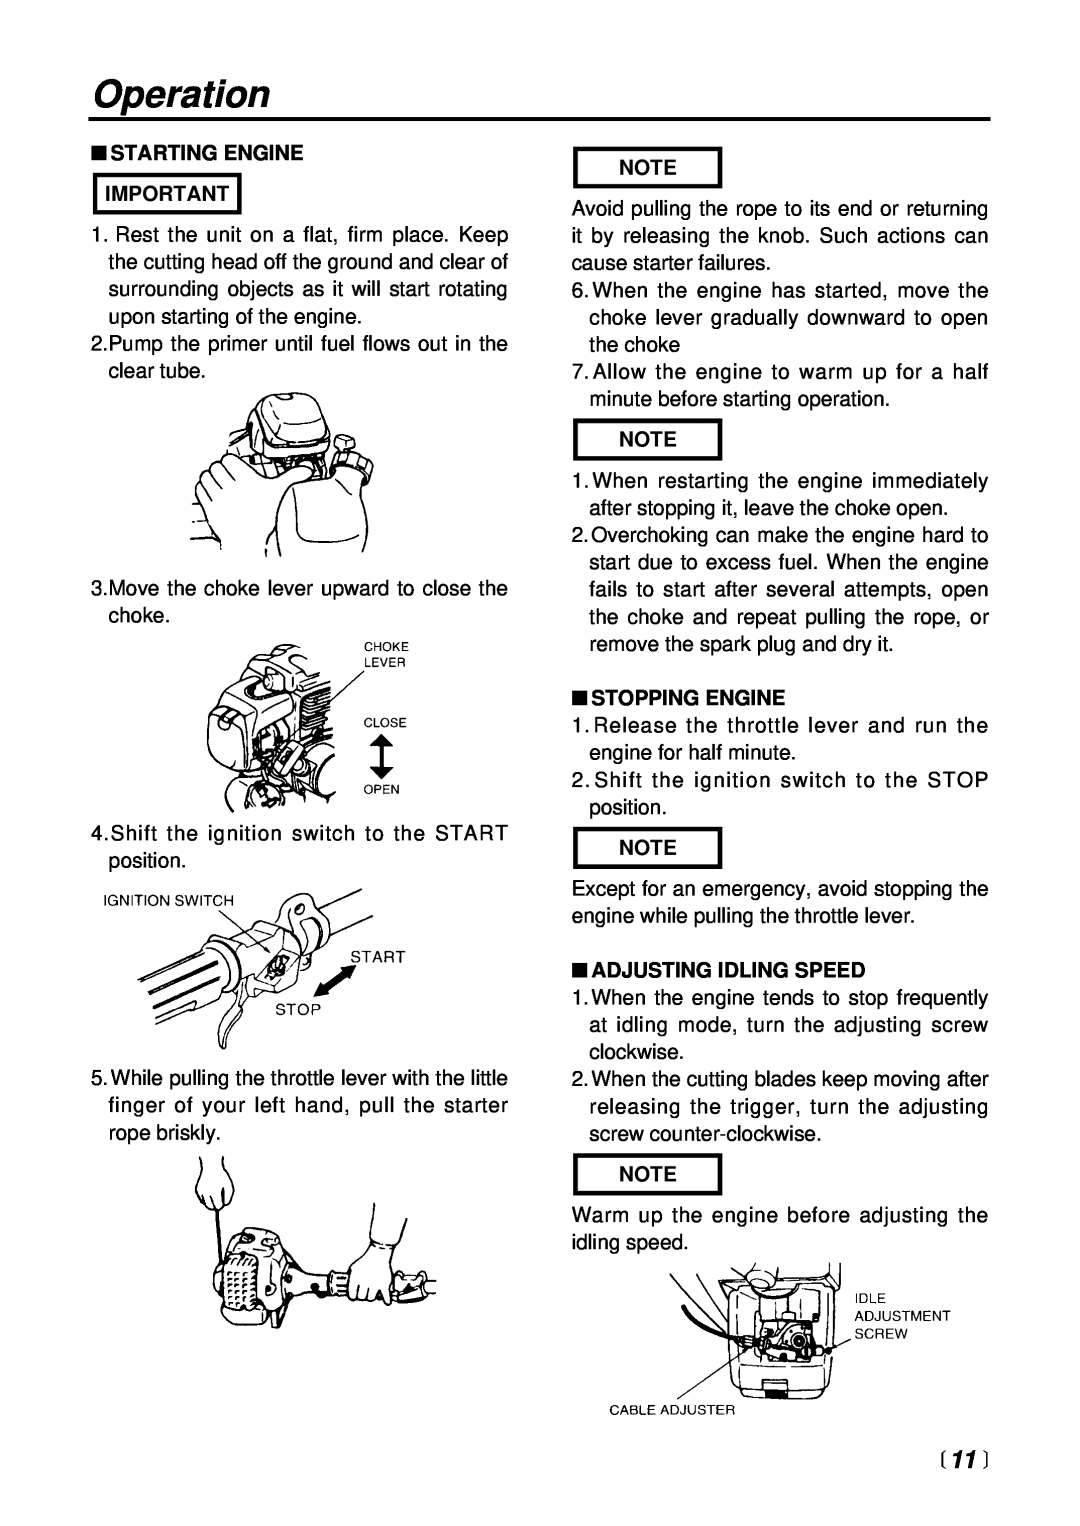 RedMax LRT2300 manual Operation,  11 , Starting Engine Important, Stopping Engine, Adjusting Idling Speed 